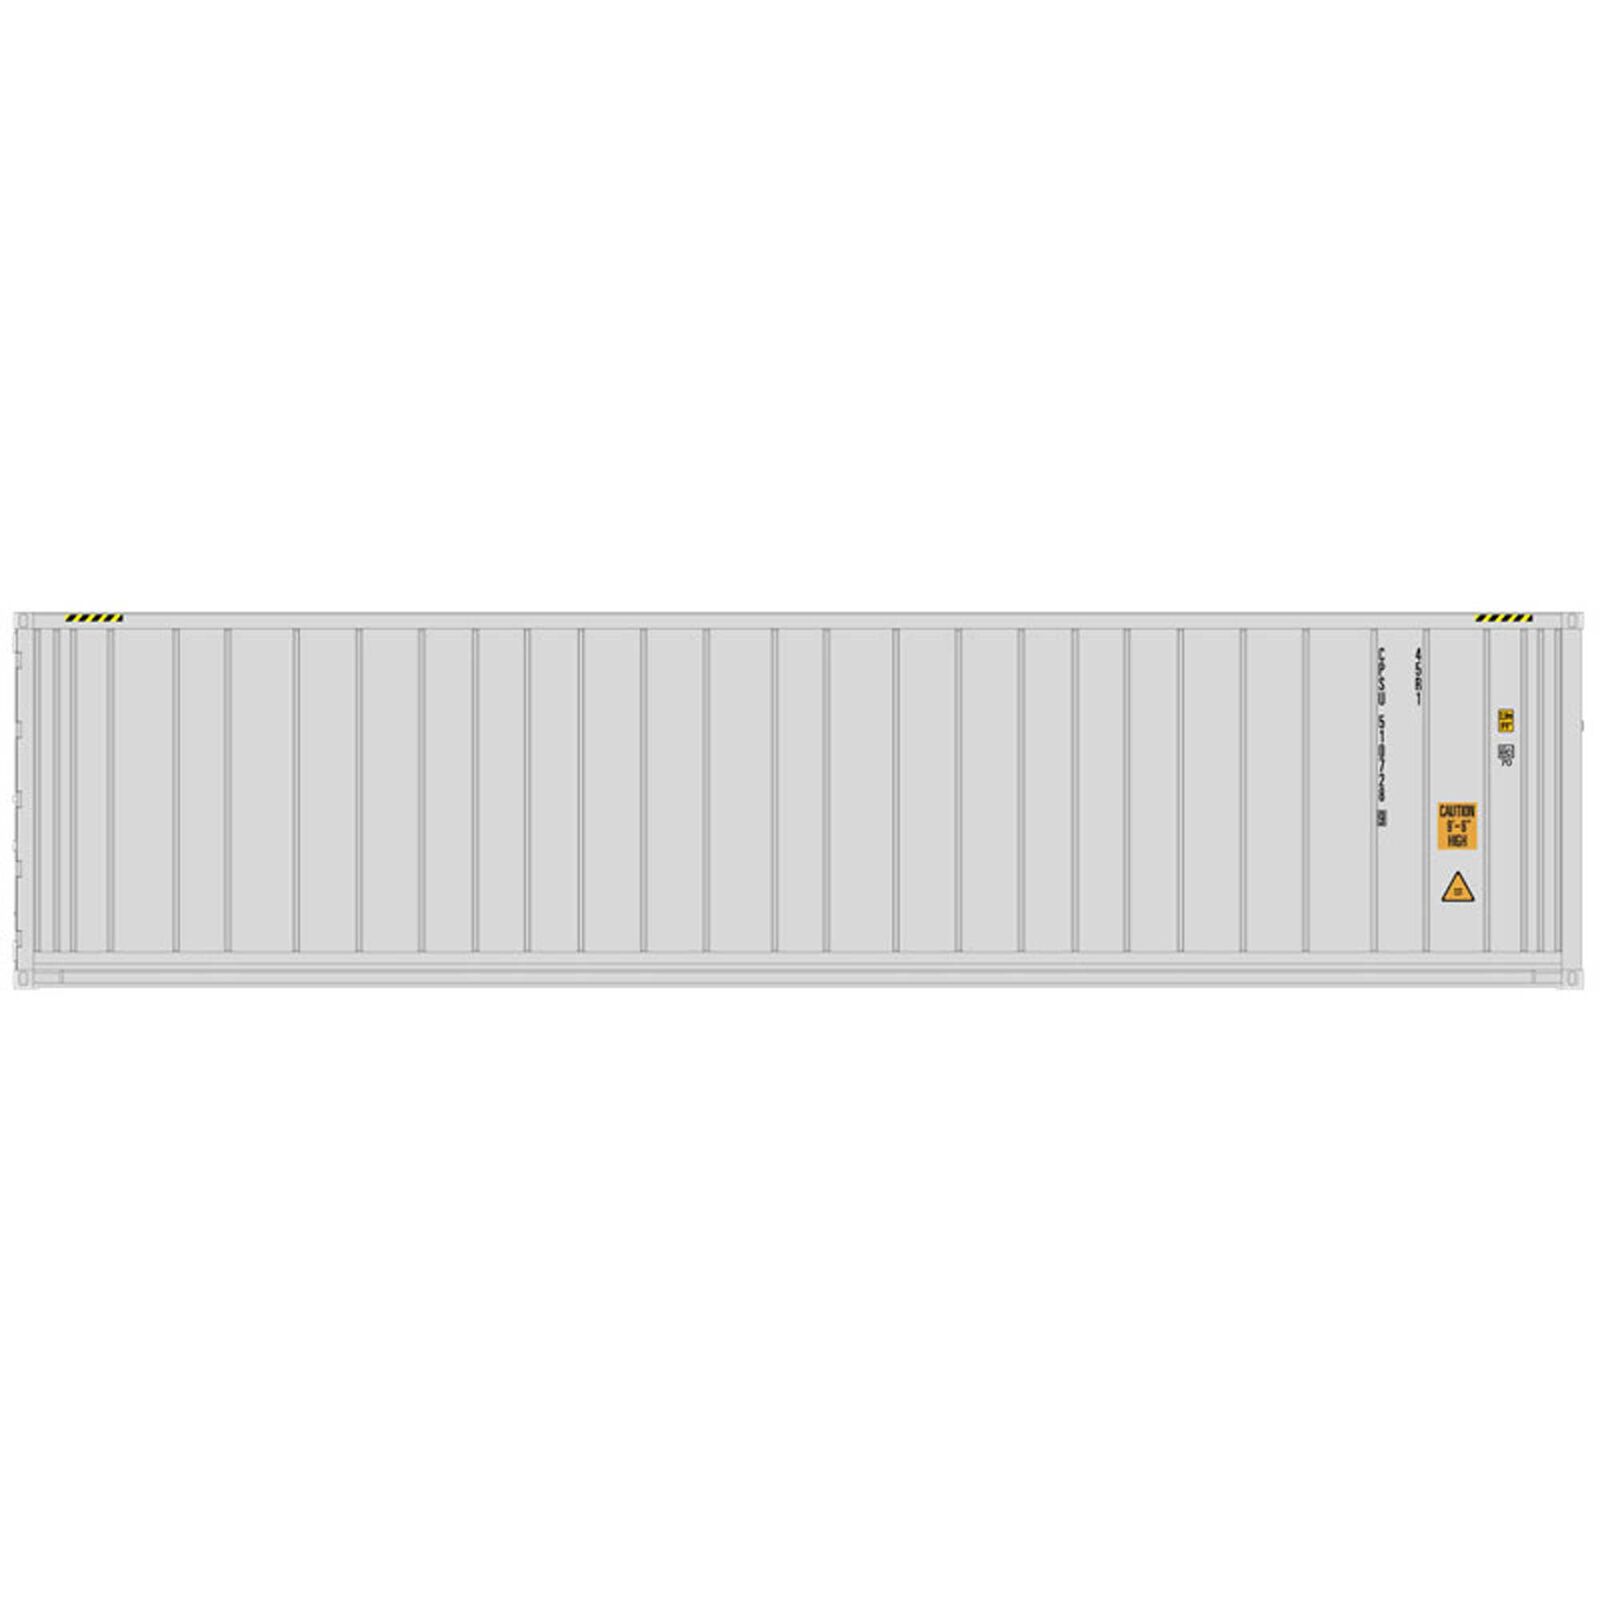 HO 40' Refrigerated Container 3PK CP Ships Set #1